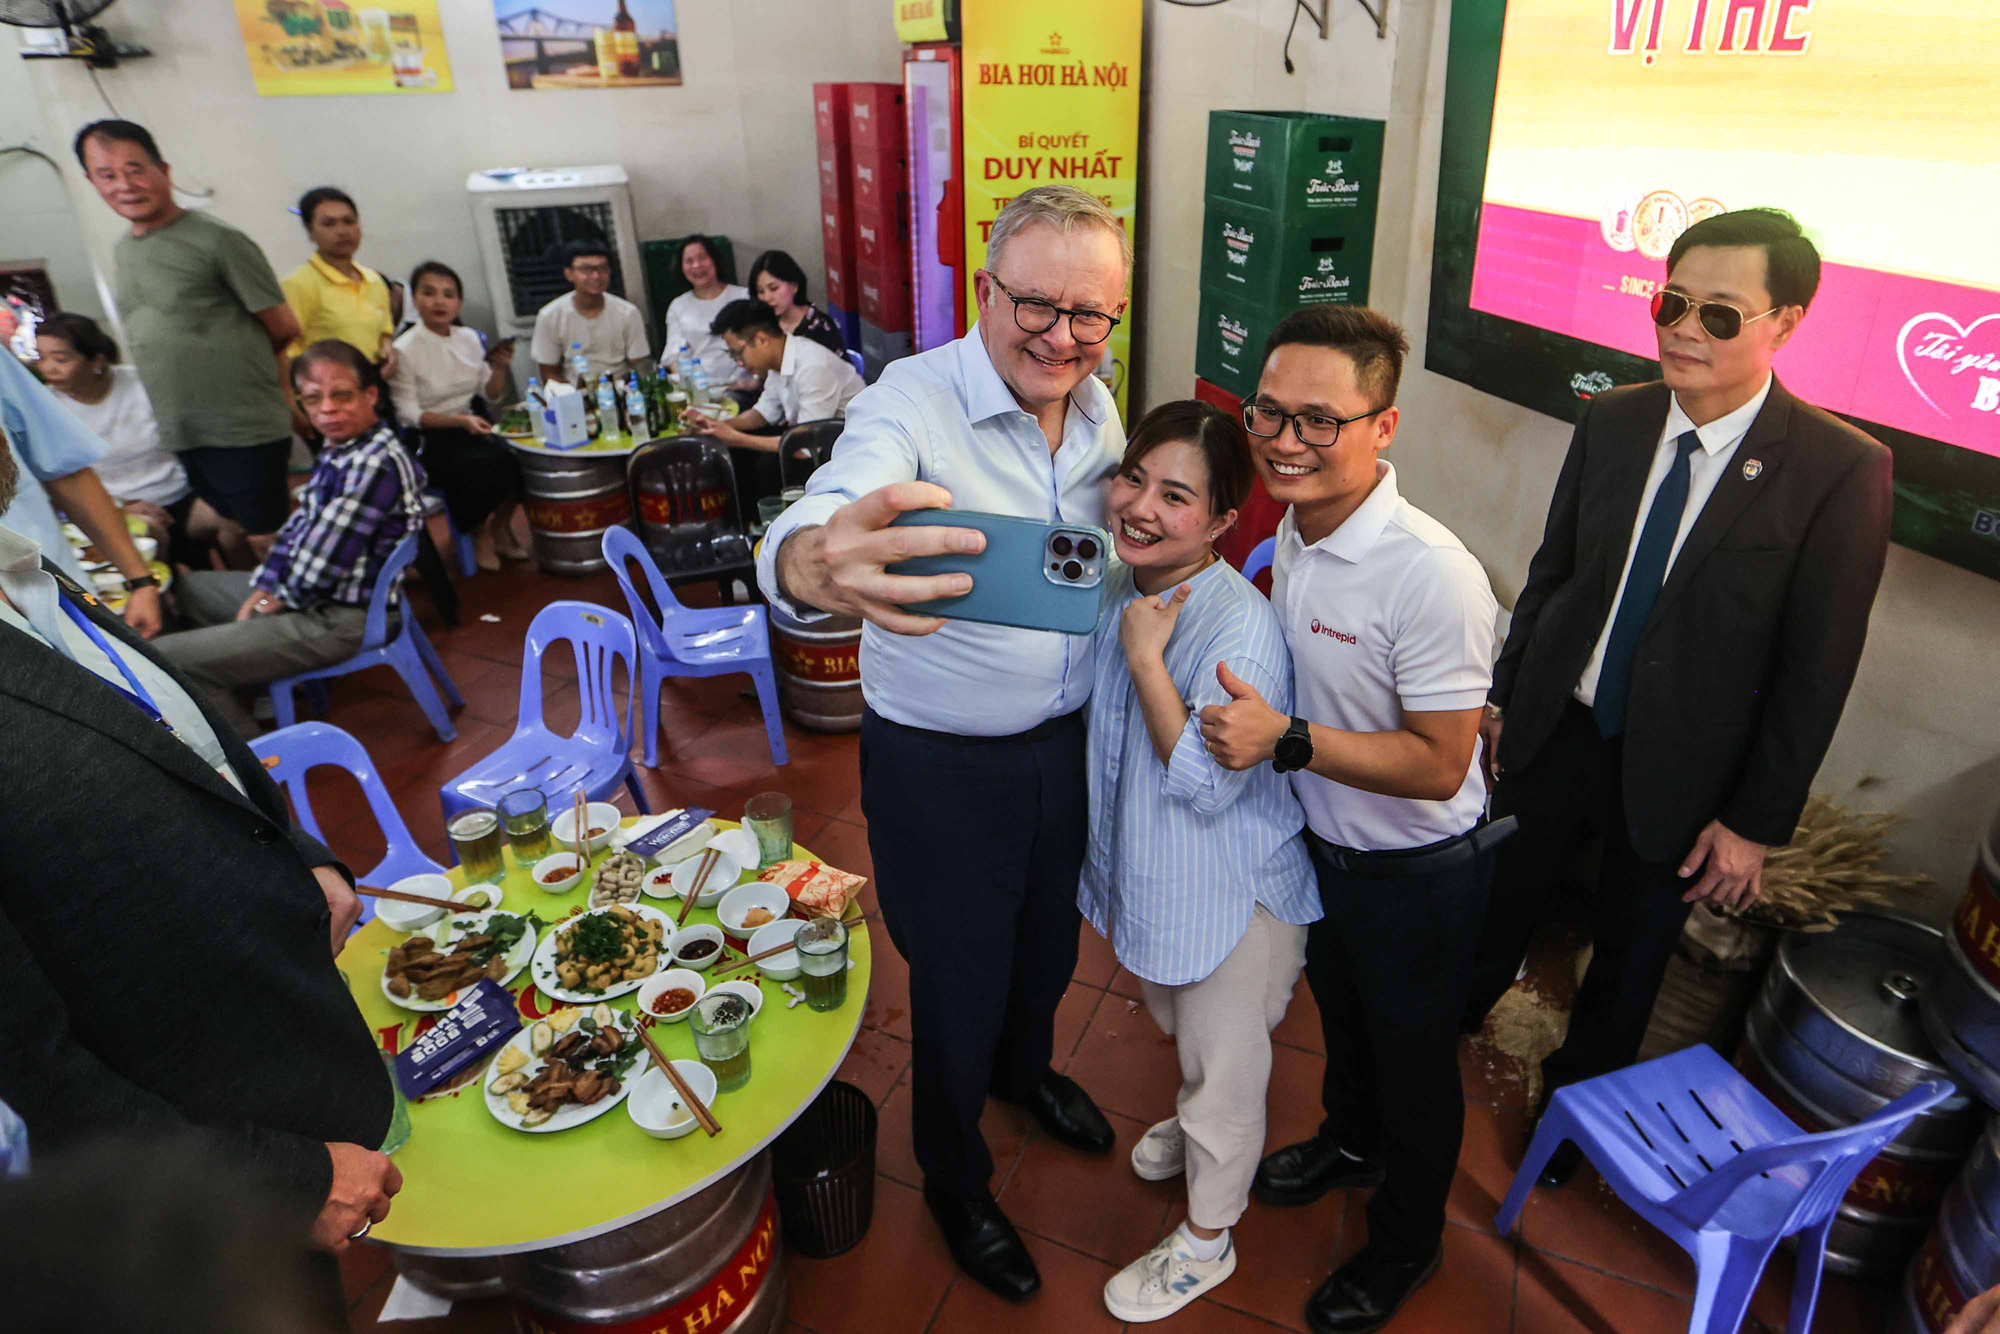 PM Albanese takes a wefie with two Vietnamese who helped him know more about Hanoian cuisine